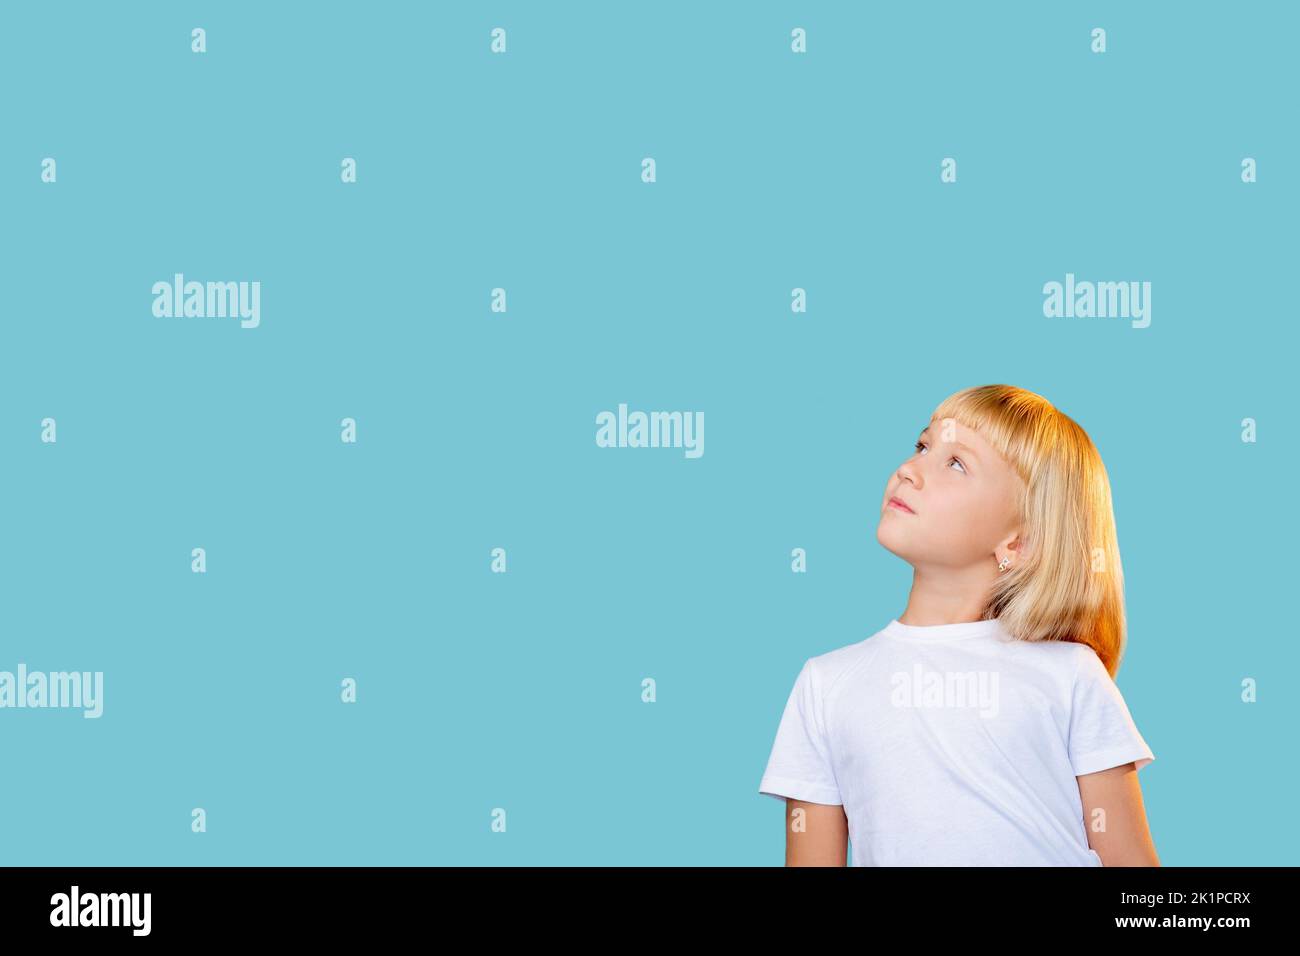 Curious kid. Promotional background. Attractive opportunity. Hard choice. Portrait of puzzled pensive blonde little girl looking up reading considerin Stock Photo